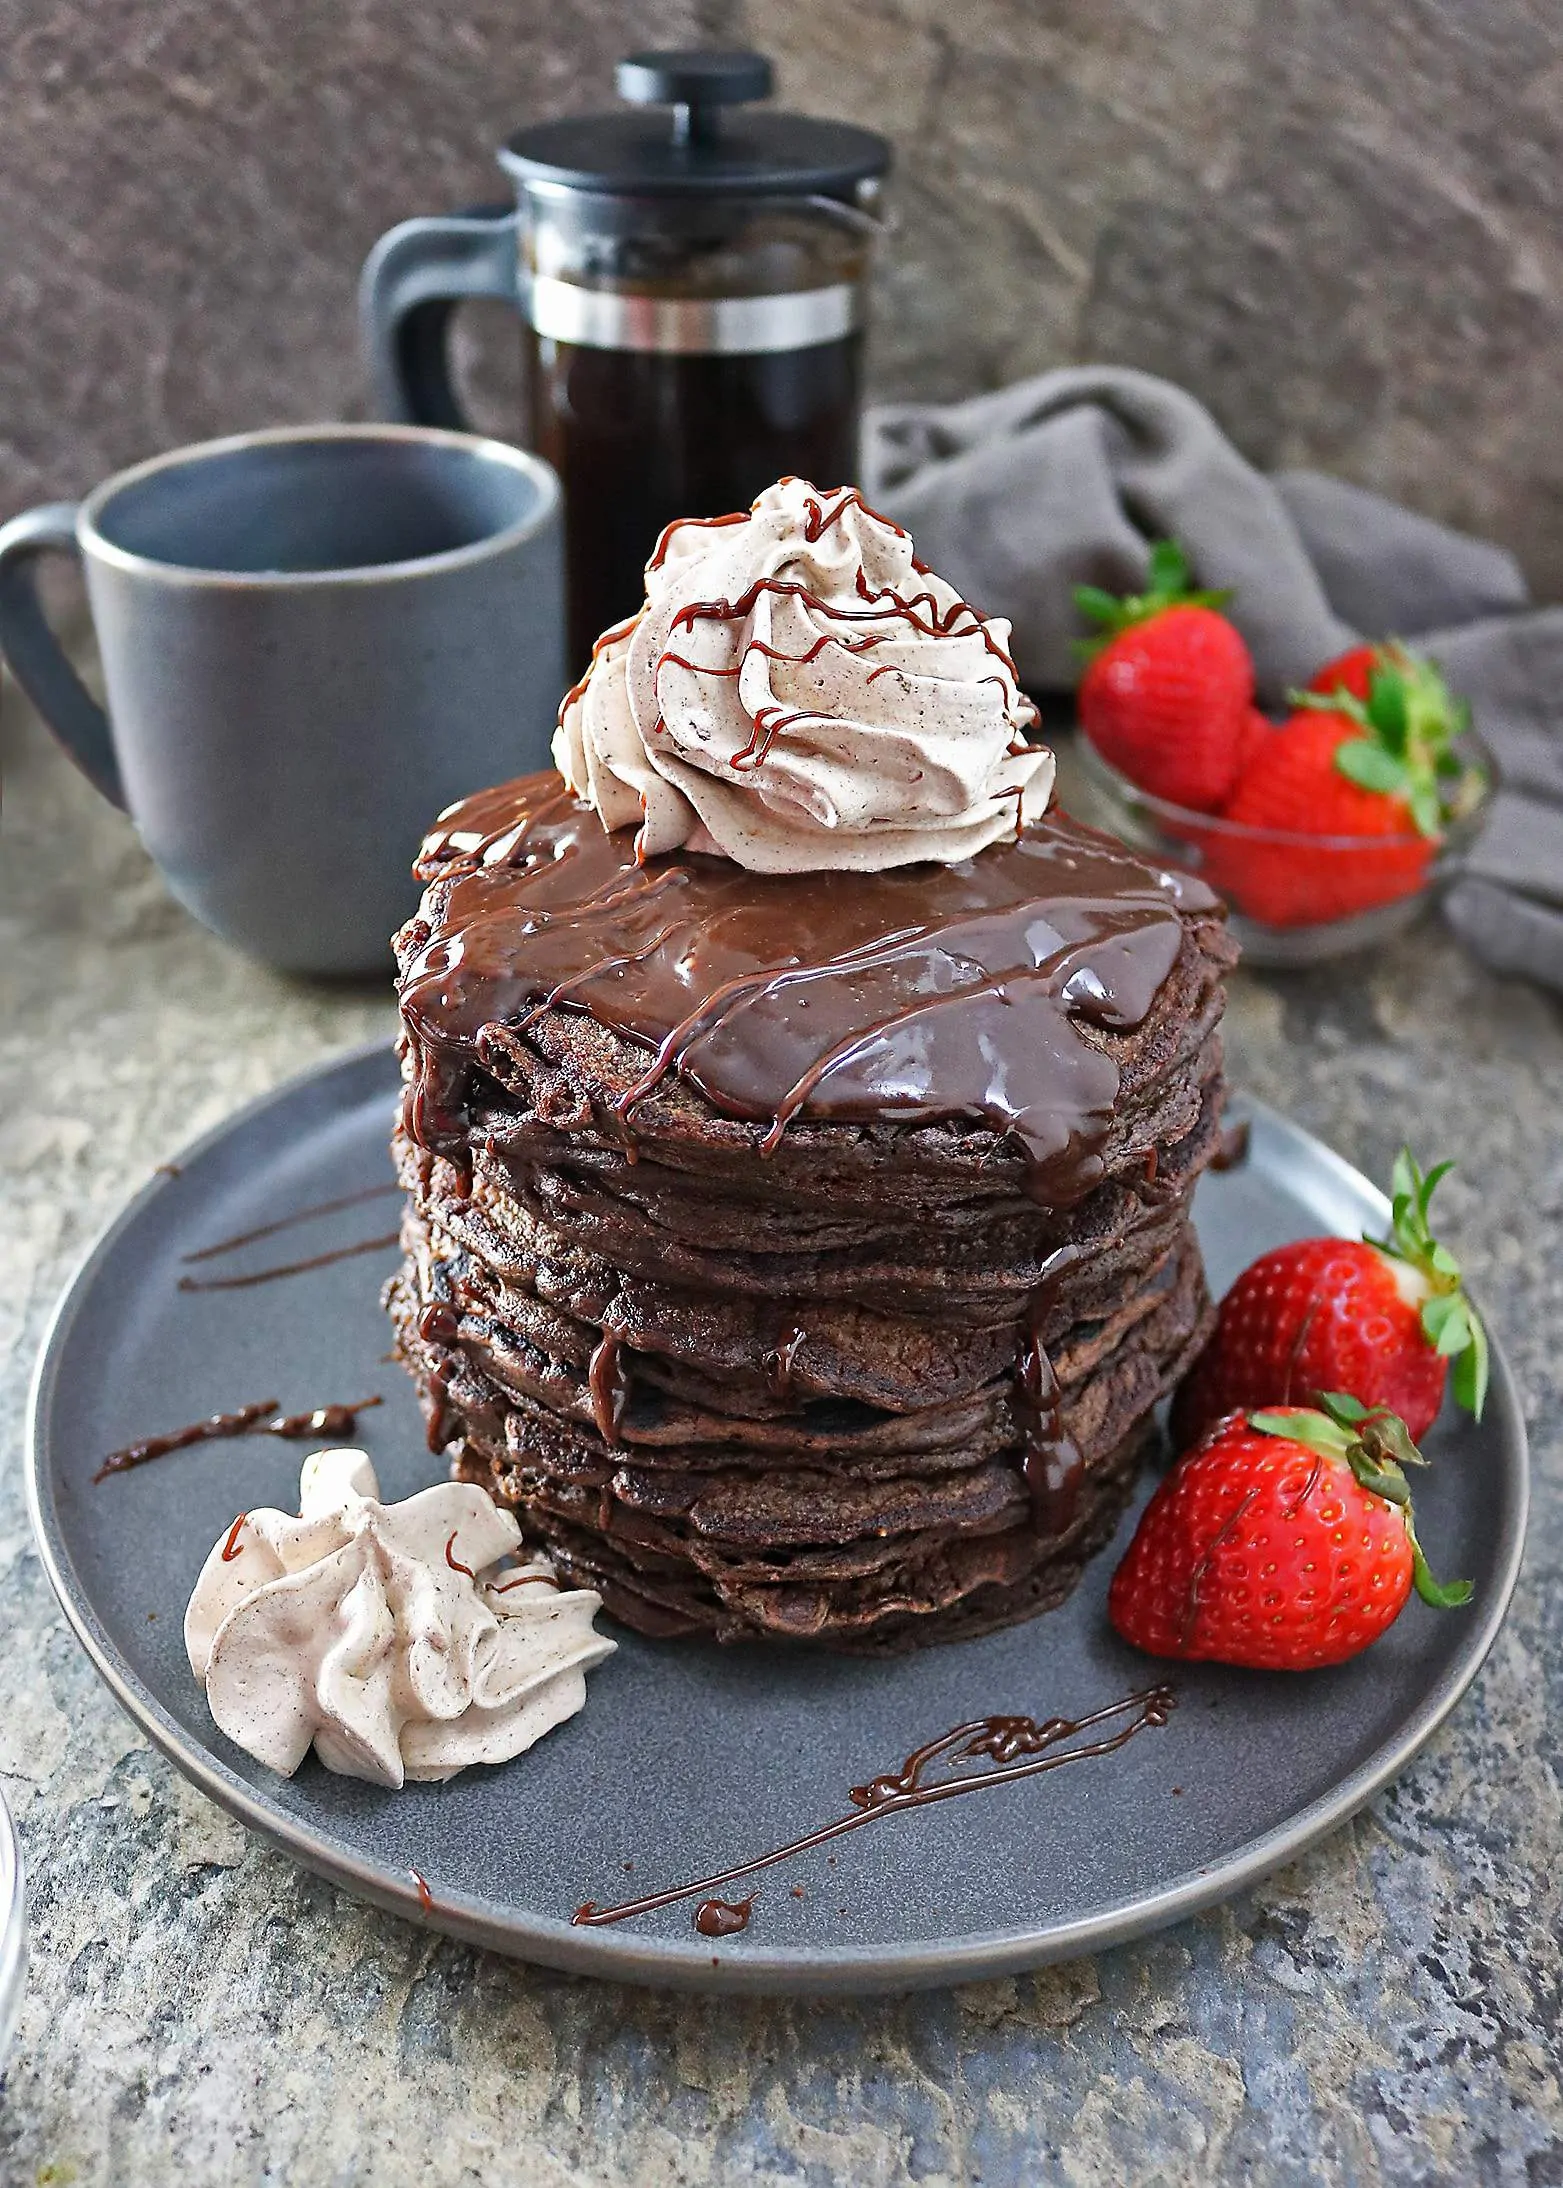 Stack of Easy Gluten Free Chocolate Oatmeal Pancakes with Chocolate sauce and chocolate whipped cream